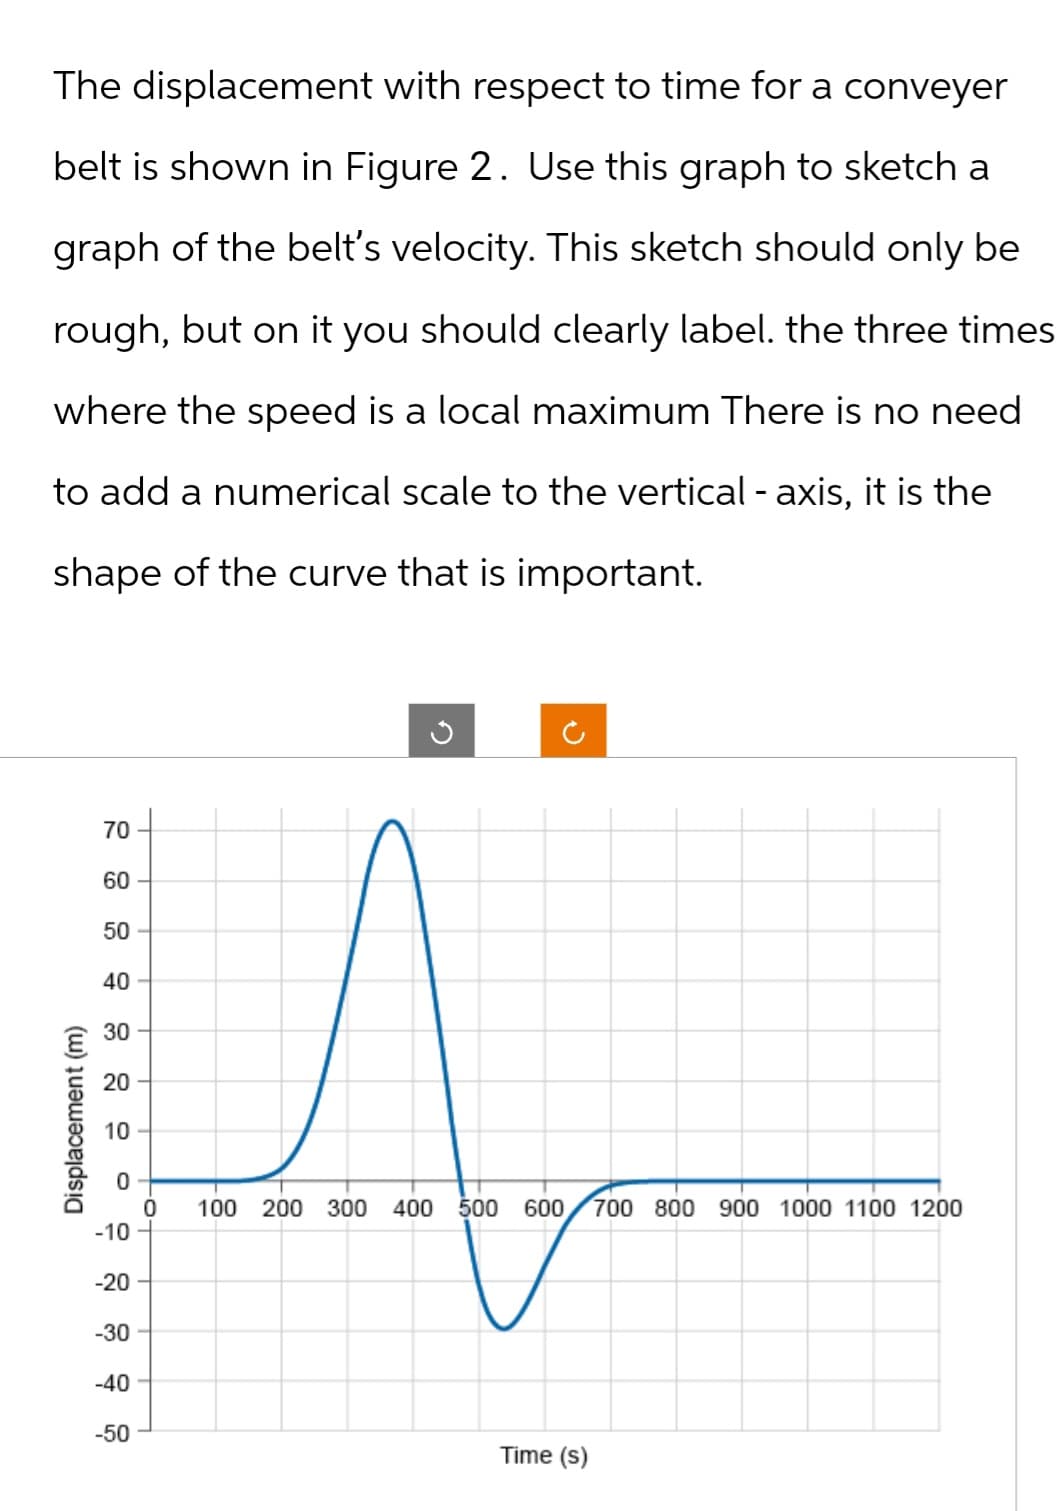 The displacement with respect to time for a conveyer
belt is shown in Figure 2. Use this graph to sketch a
graph of the belt's velocity. This sketch should only be
rough, but on it you should clearly label. the three times
where the speed is a local maximum There is no need
to add a numerical scale to the vertical - axis, it is the
shape of the curve that is important.
ก
ง
-10-
0
100 200 300 400 500 600 700 800 900 1000 1100 1200
70
60
2840
50
40
322022345
Displacement (m)
Time (s)